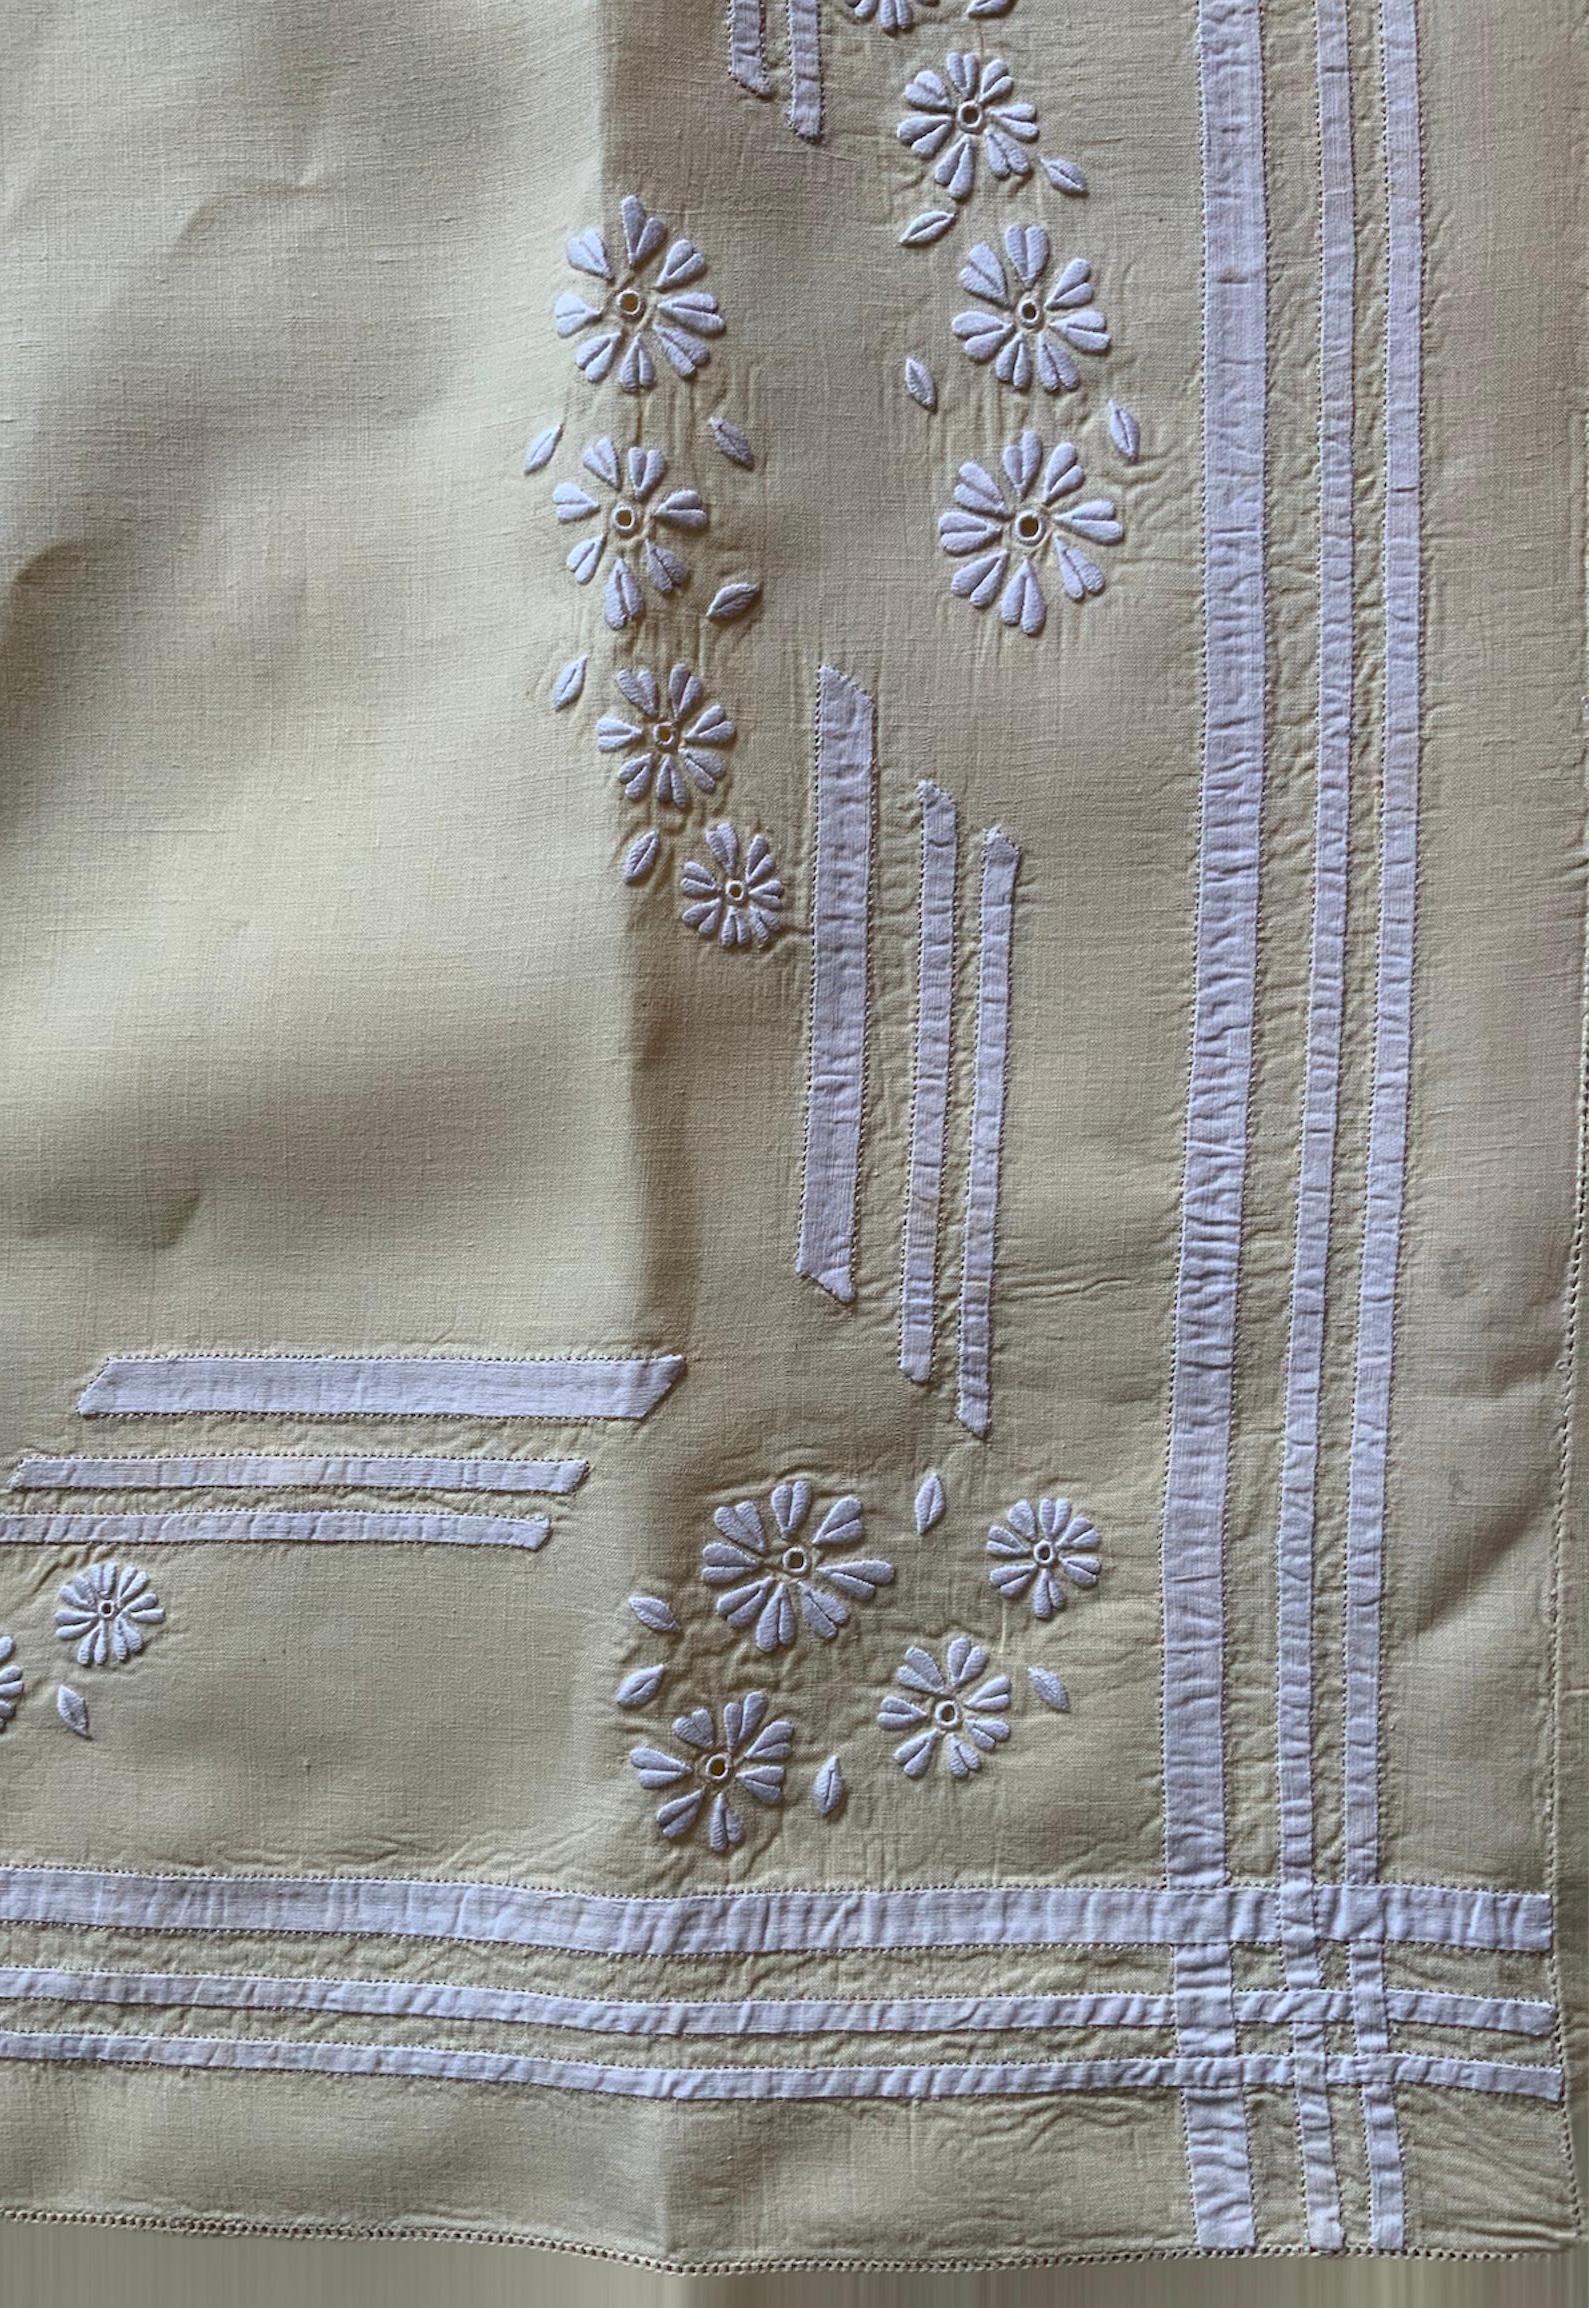 This is a vintage set of two bed linen full/queen flat sheets and two pillowcases. They are light yellow color. One of them is embellished with some embroidered white Jasmine flowers and leaves. Delicate set of vertical white linen “ribbons” and